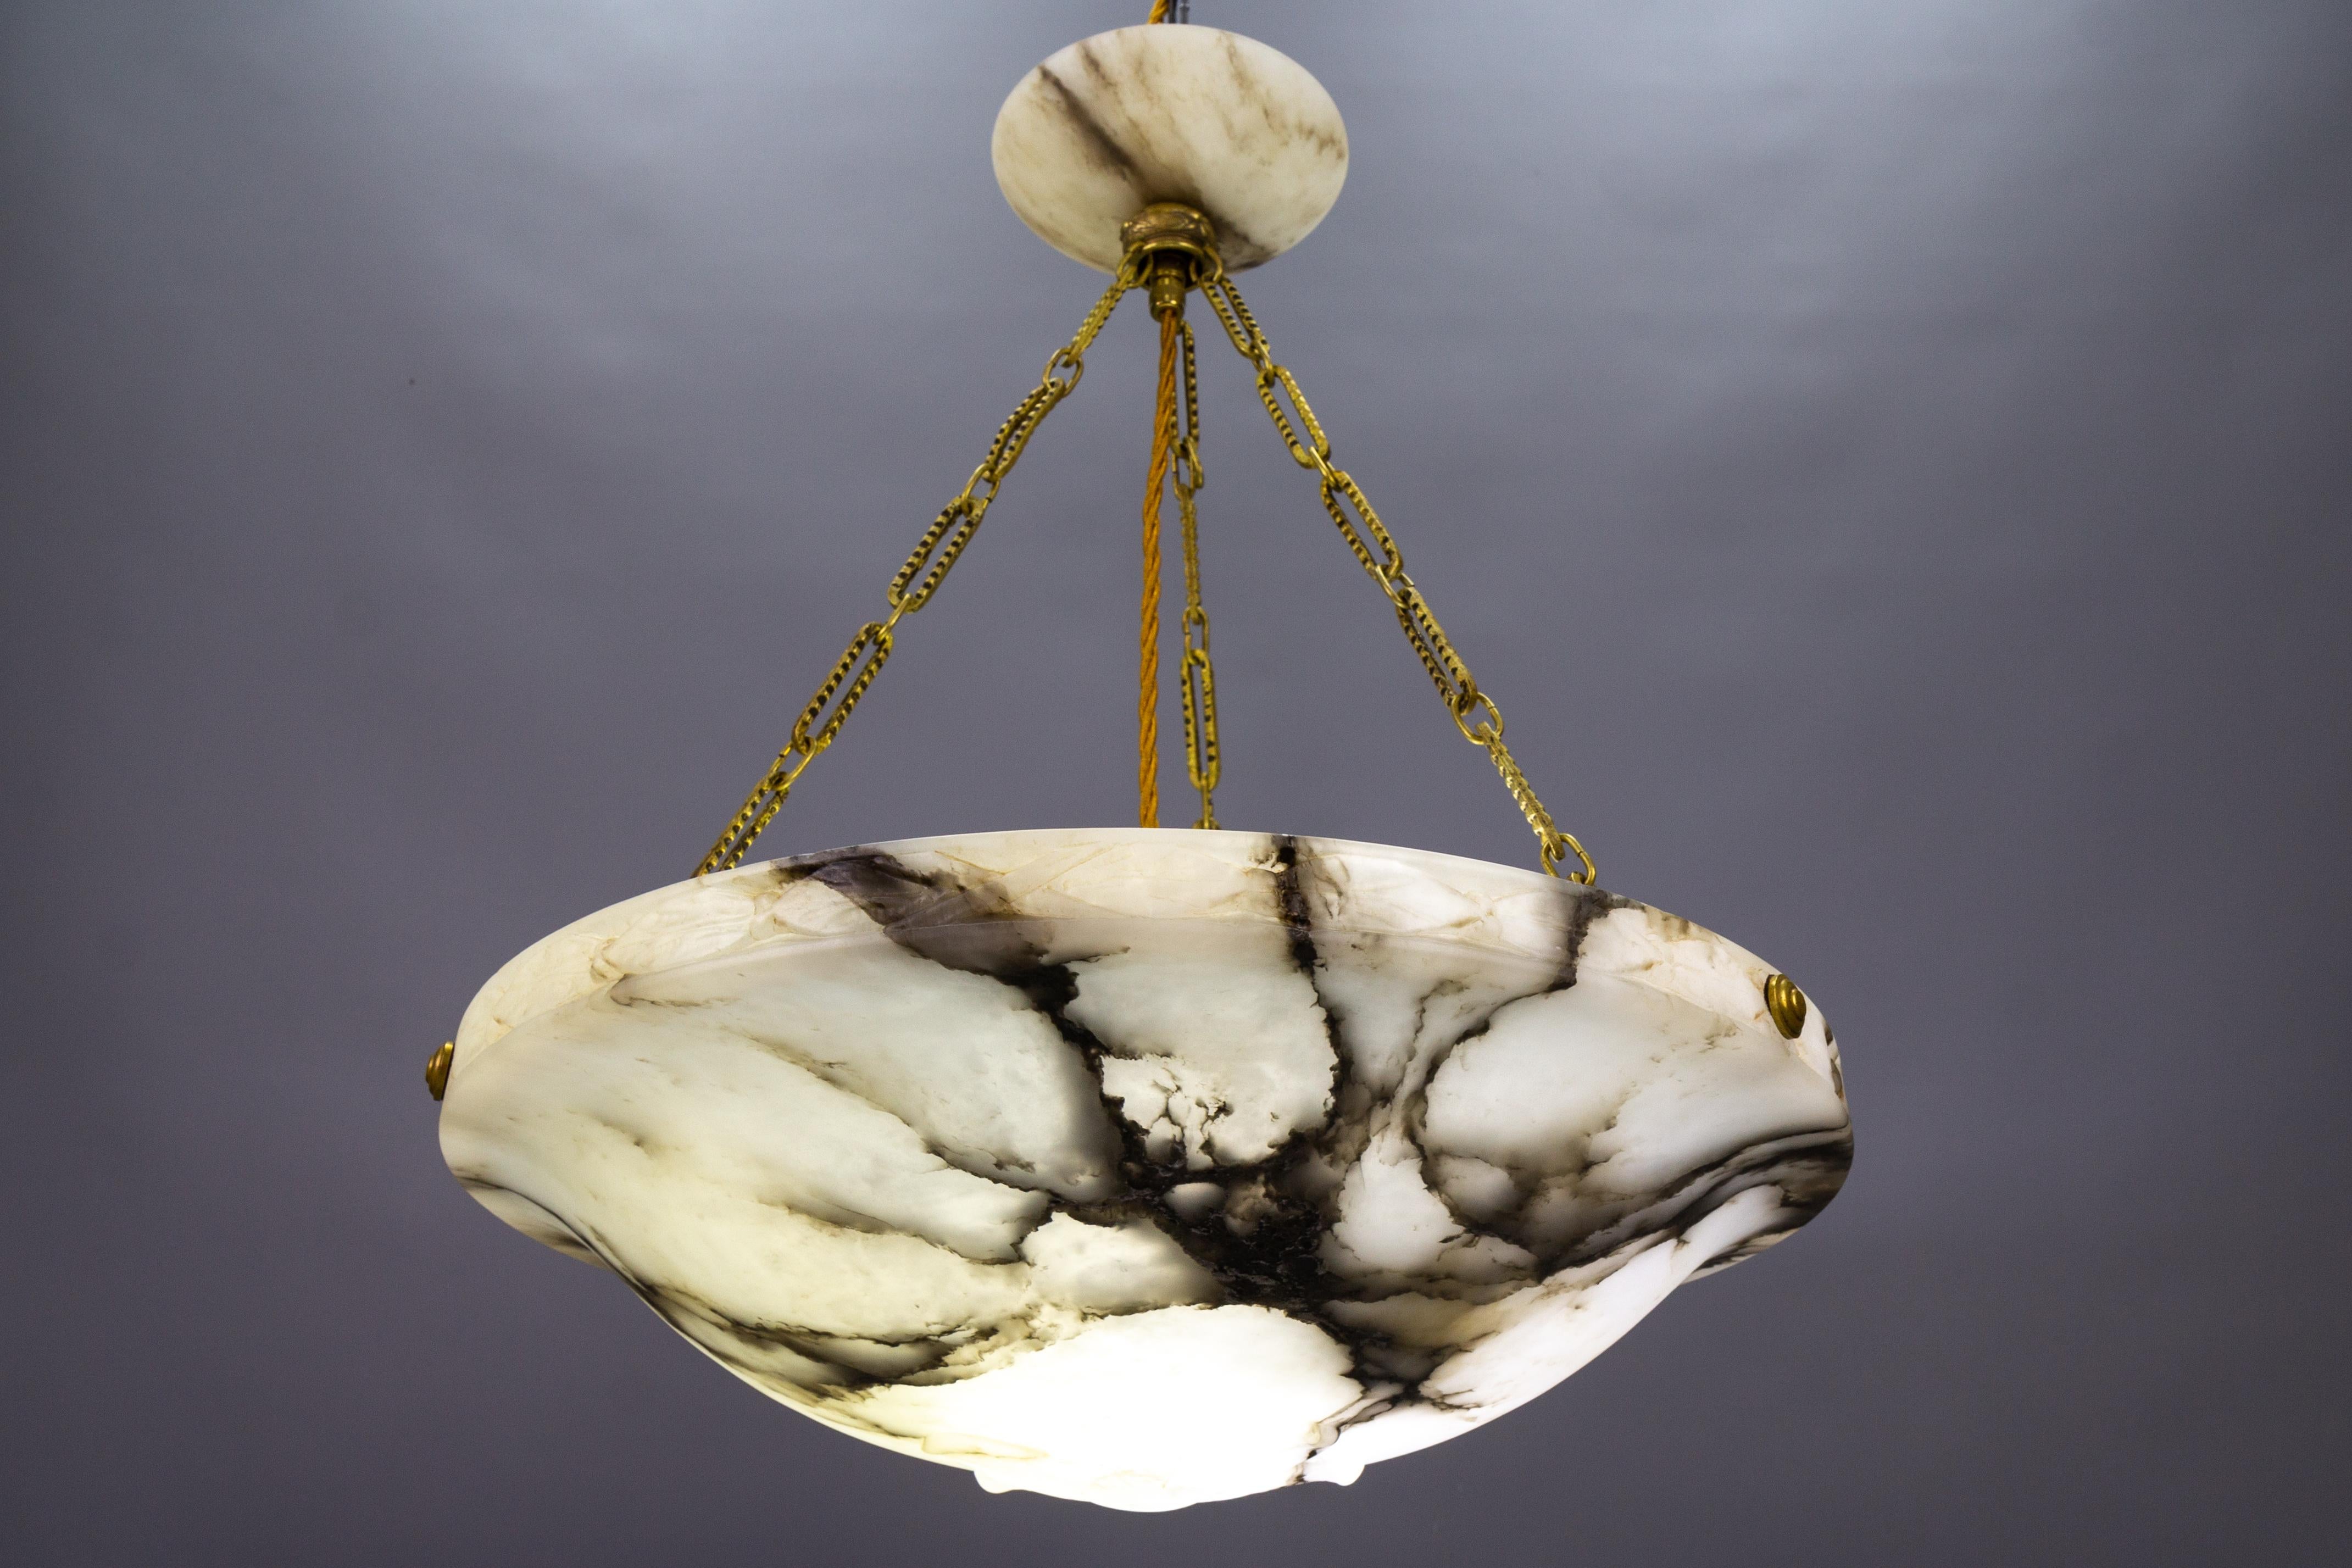 Antique French Art Deco black veined white alabaster pendant light fixture.
Gorgeous alabaster pendant ceiling light fixture from circa 1920. Beautifully veined and masterfully carved soft white alabaster bowl suspended by three brass chains and an